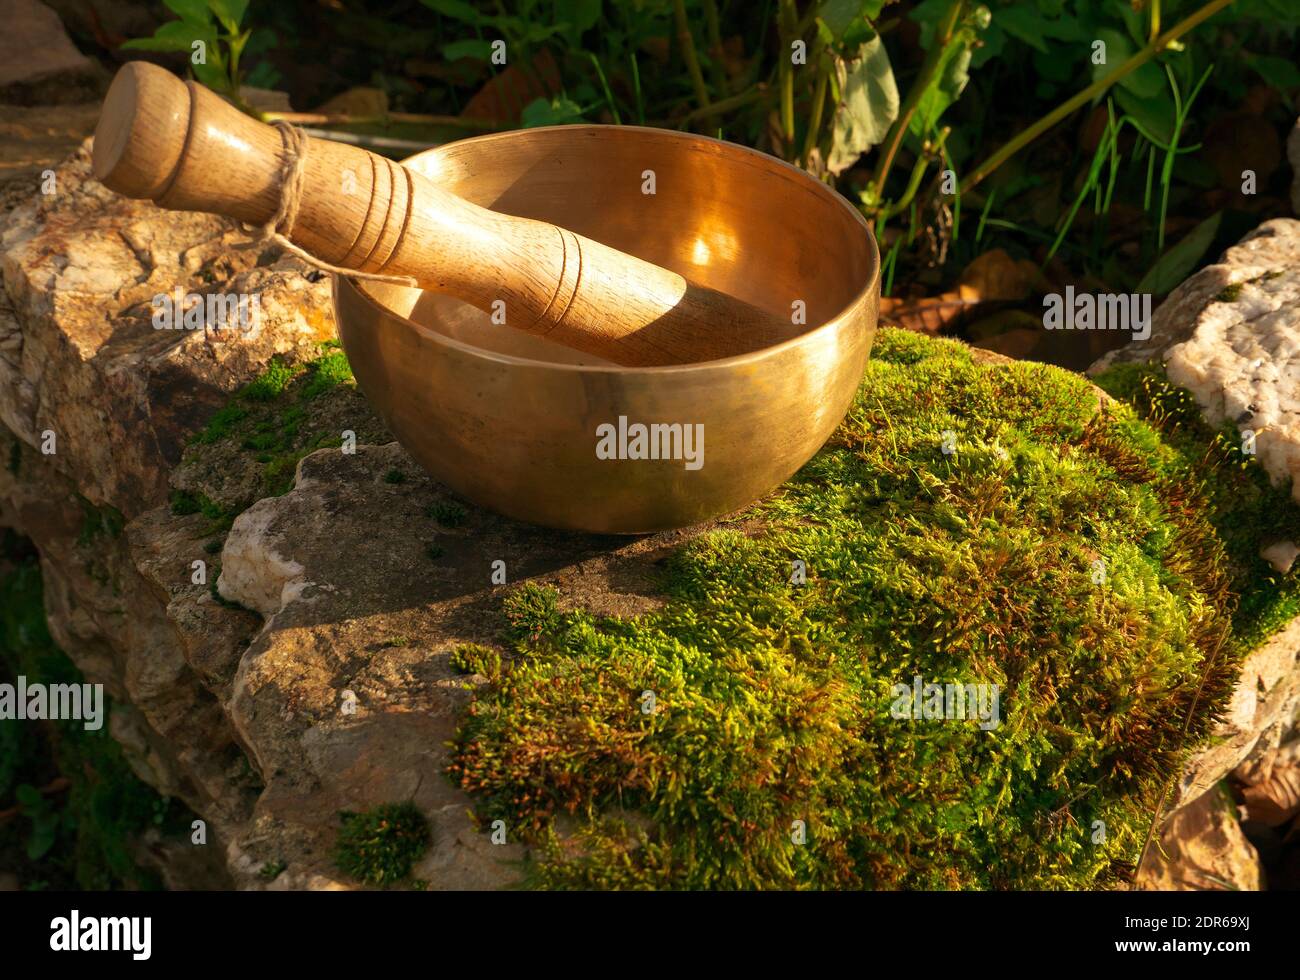 Singing bowl placed on a rock with plant moss Stock Photo